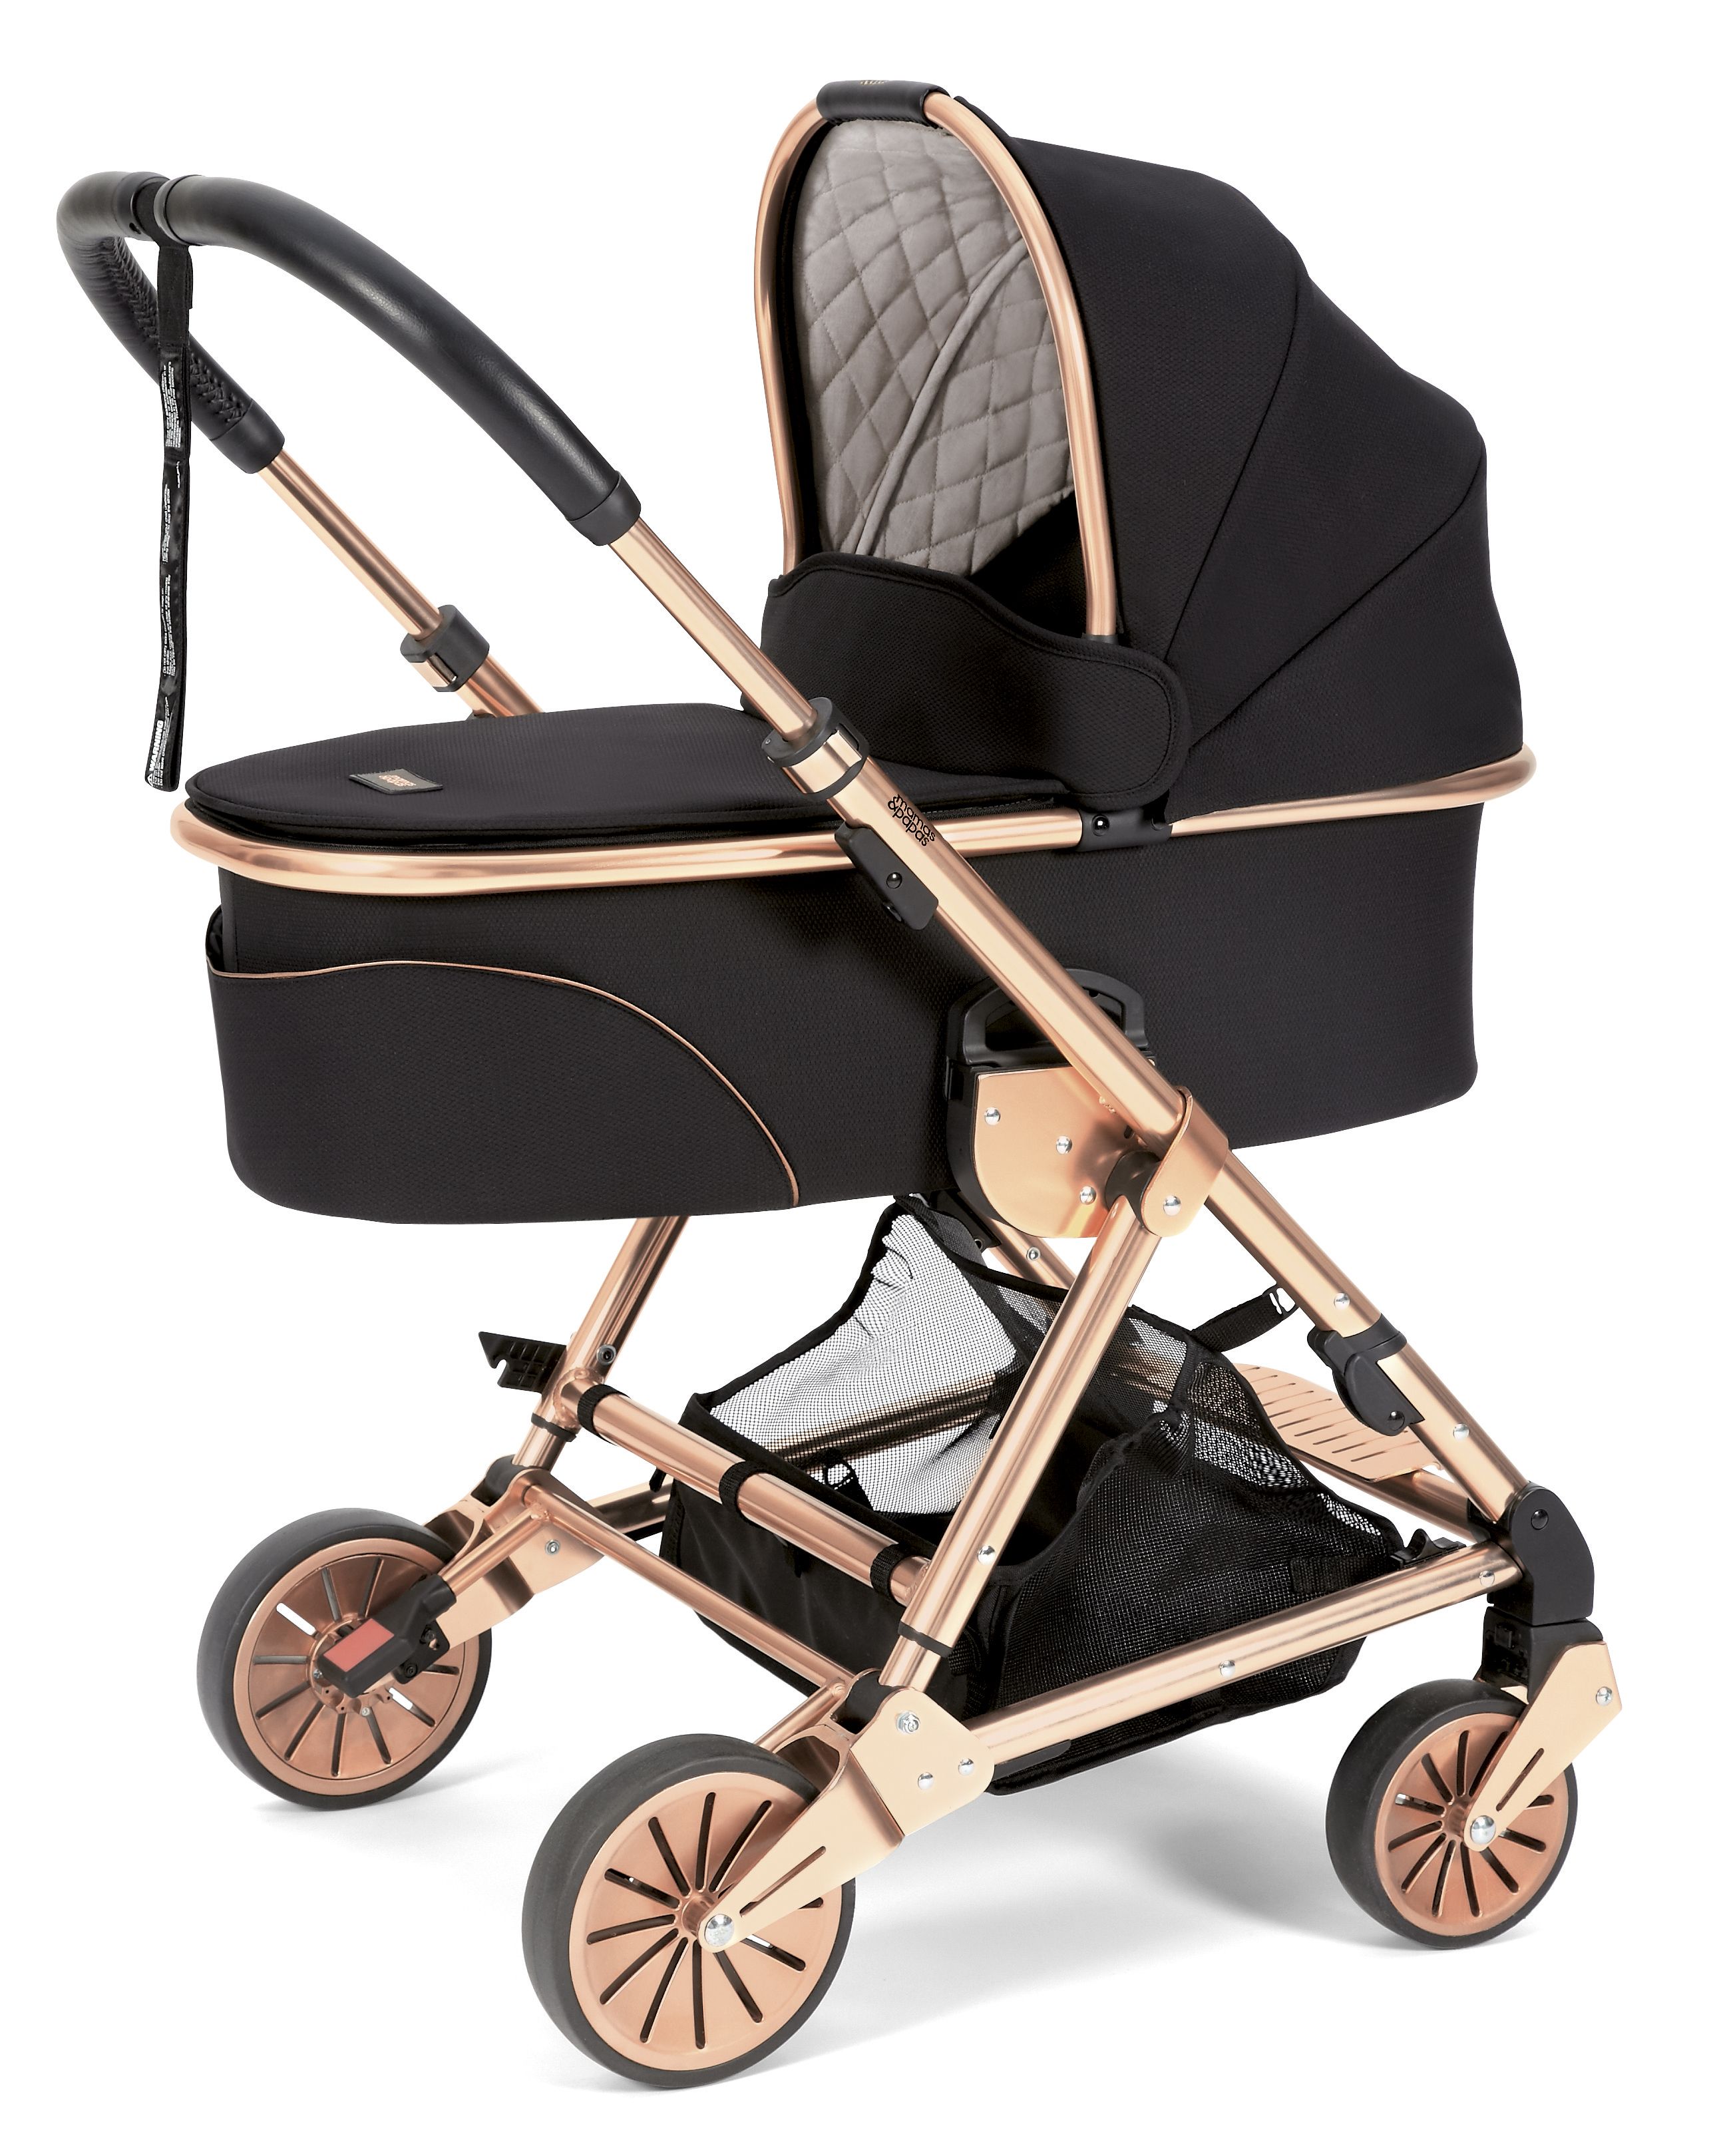 mamas and papas new stroller